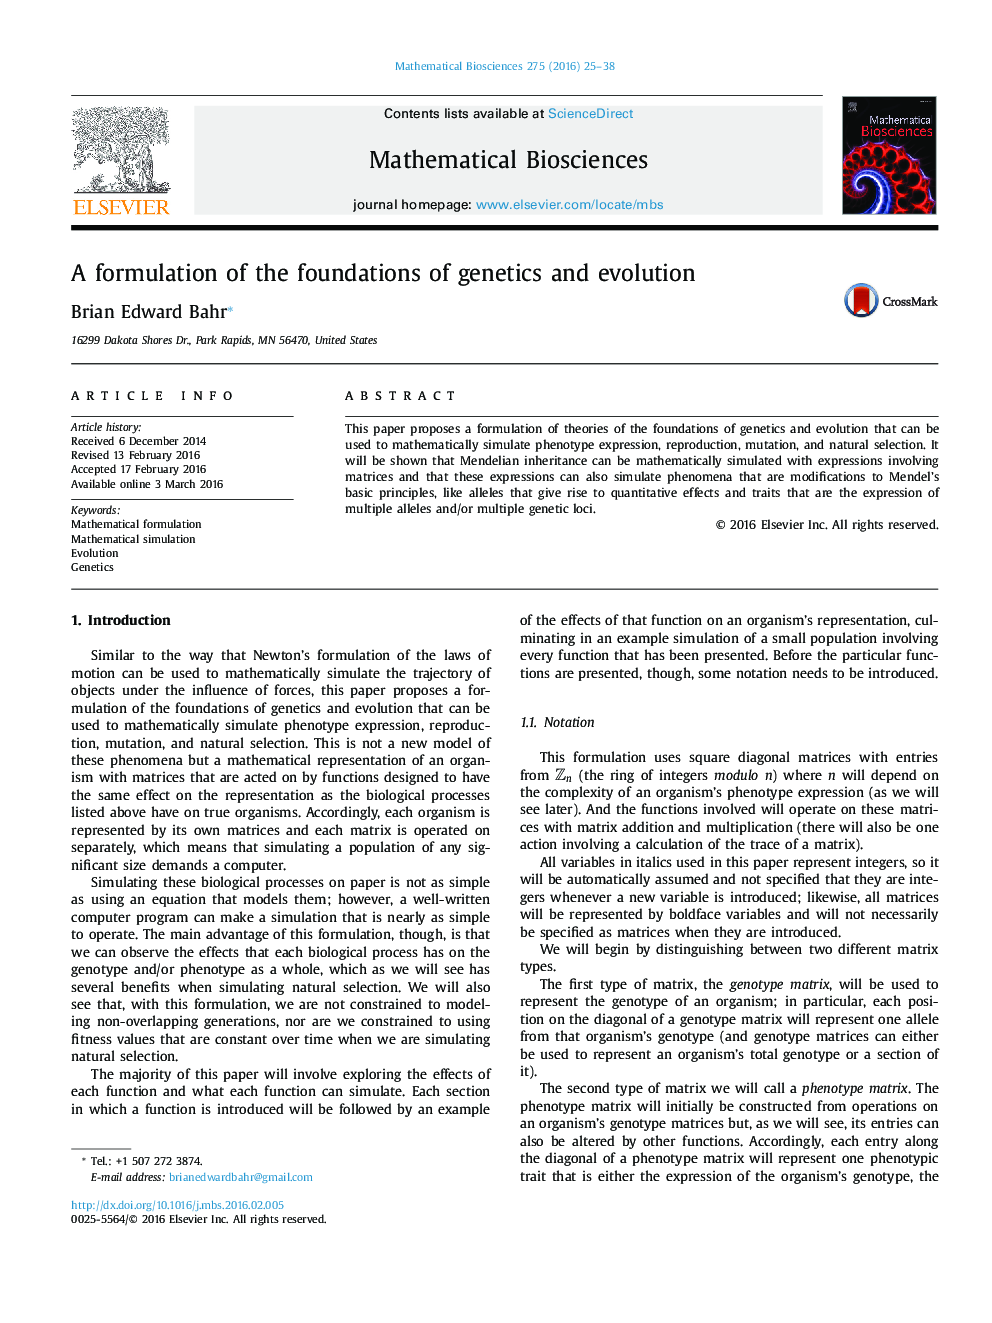 A formulation of the foundations of genetics and evolution